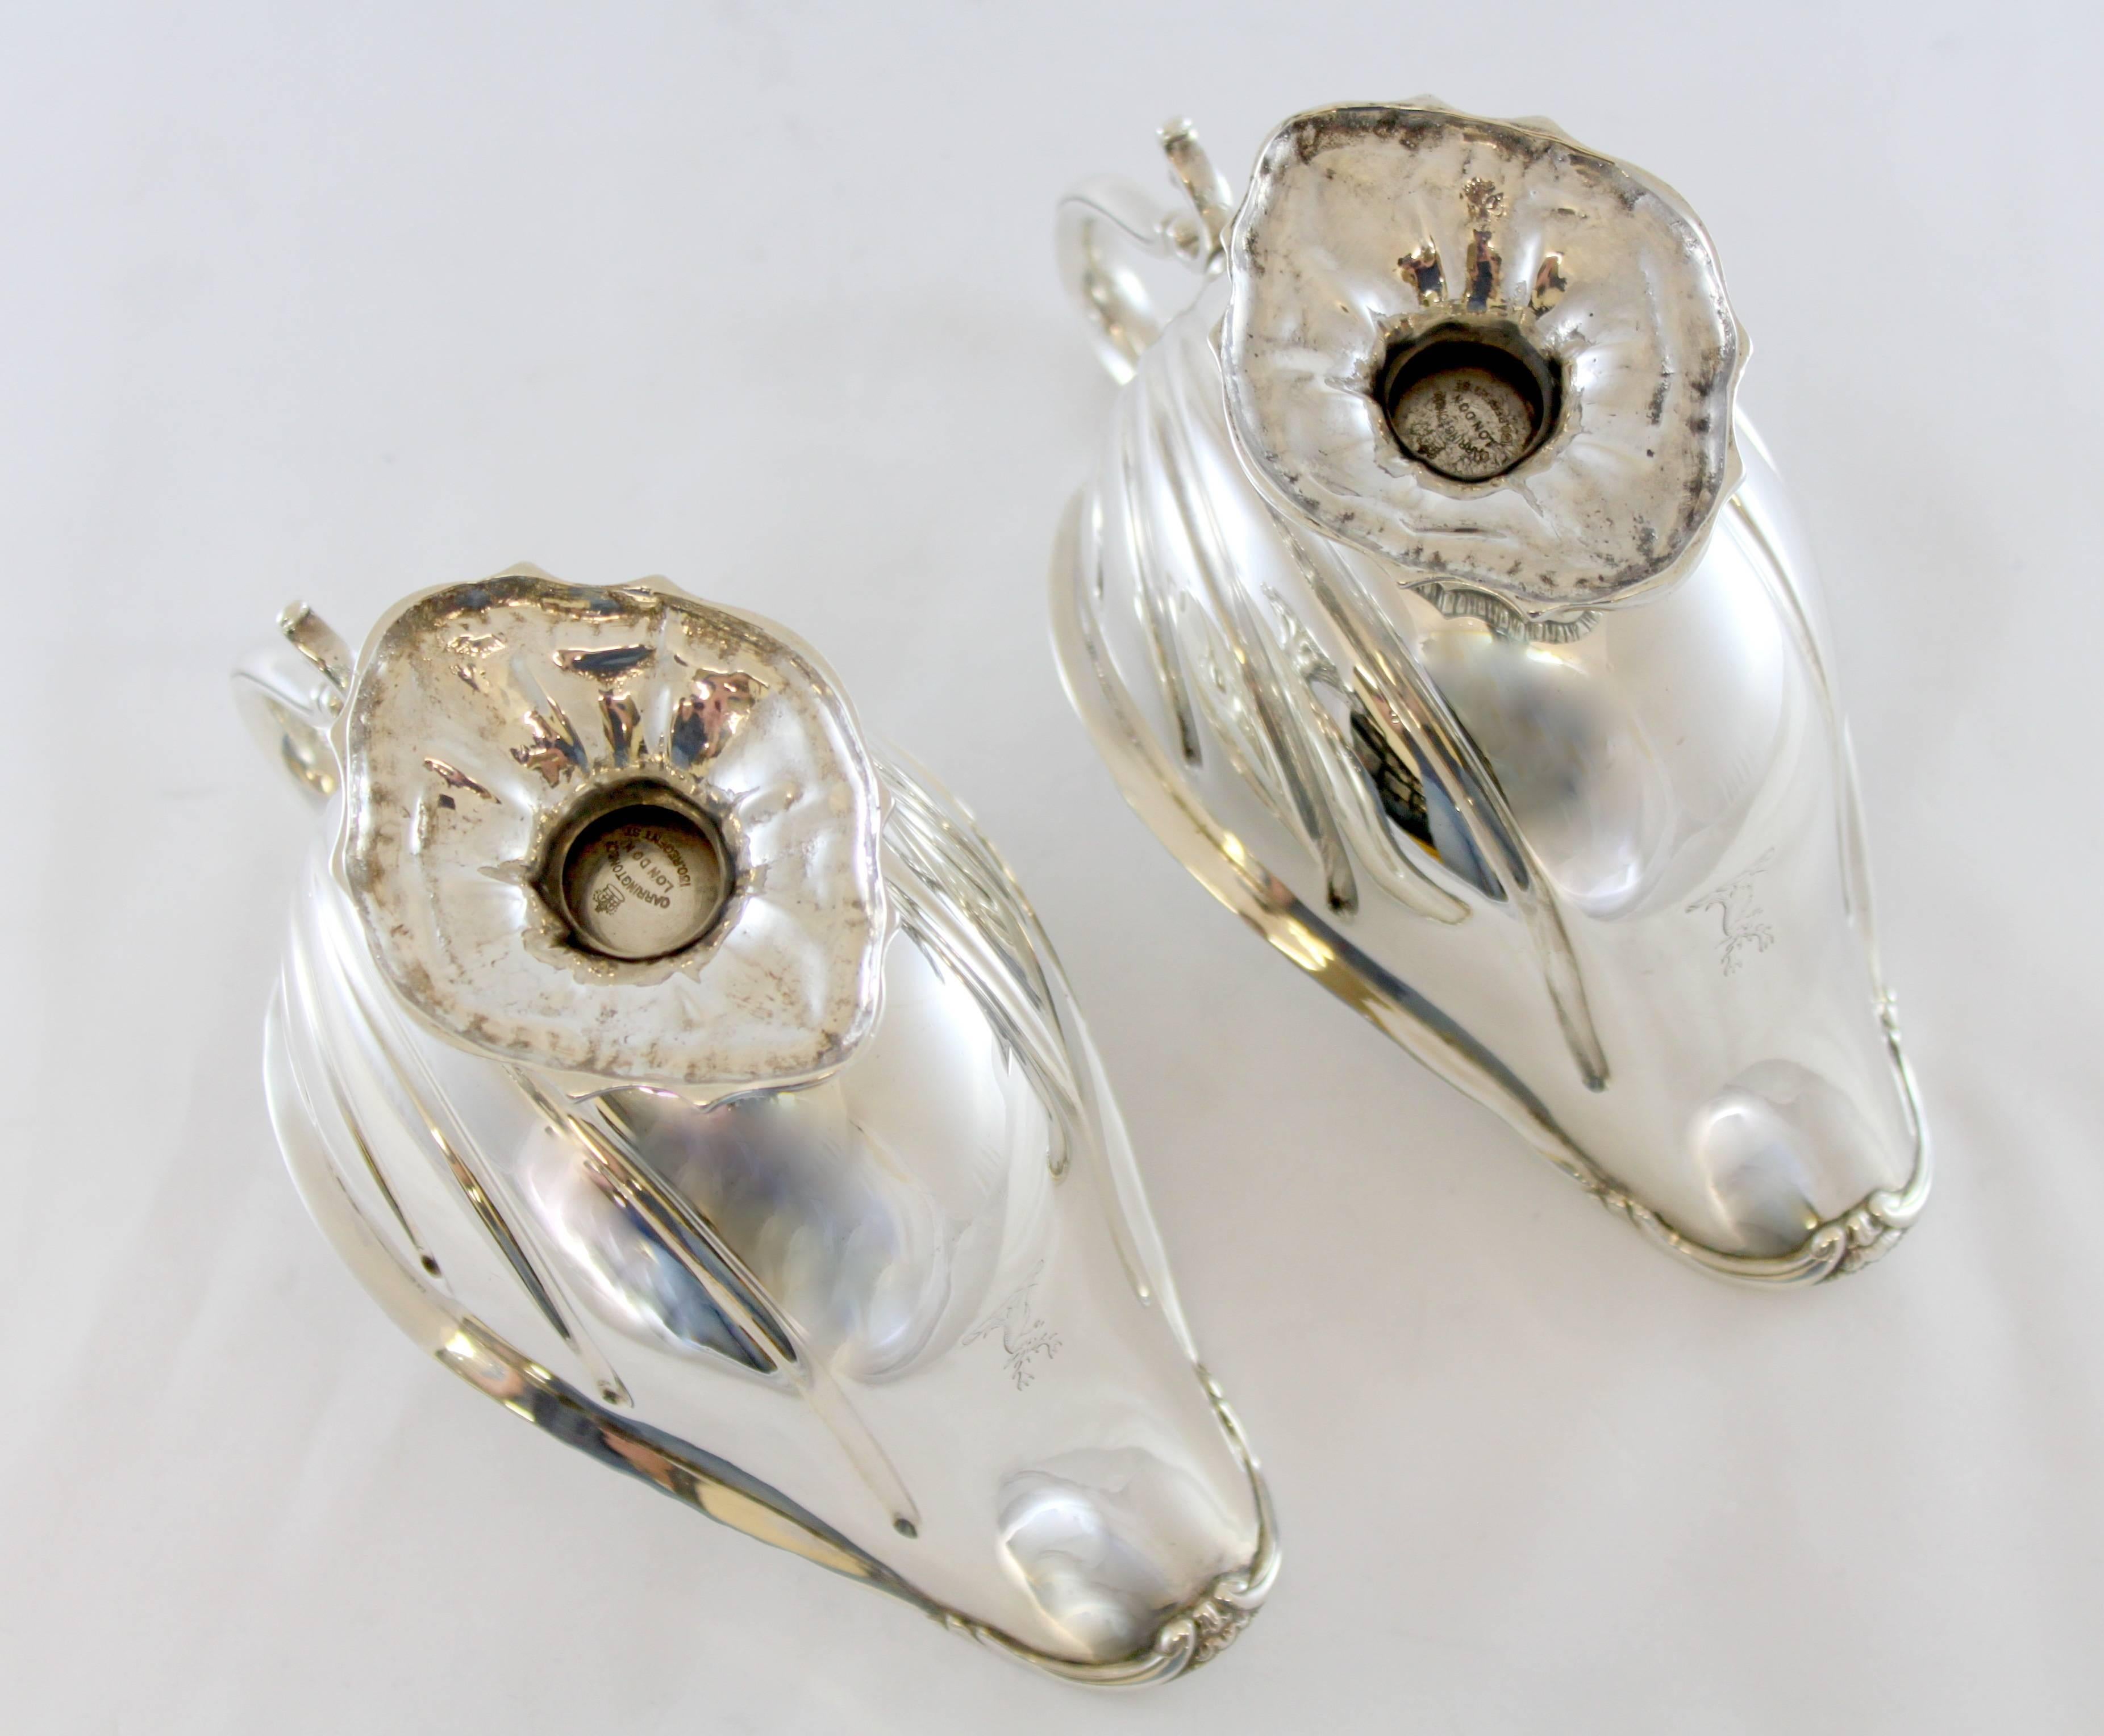 Early 20th Century Early Edwardian Pair of Sterling Silver Creamers, Carrington & Co, London, 1900